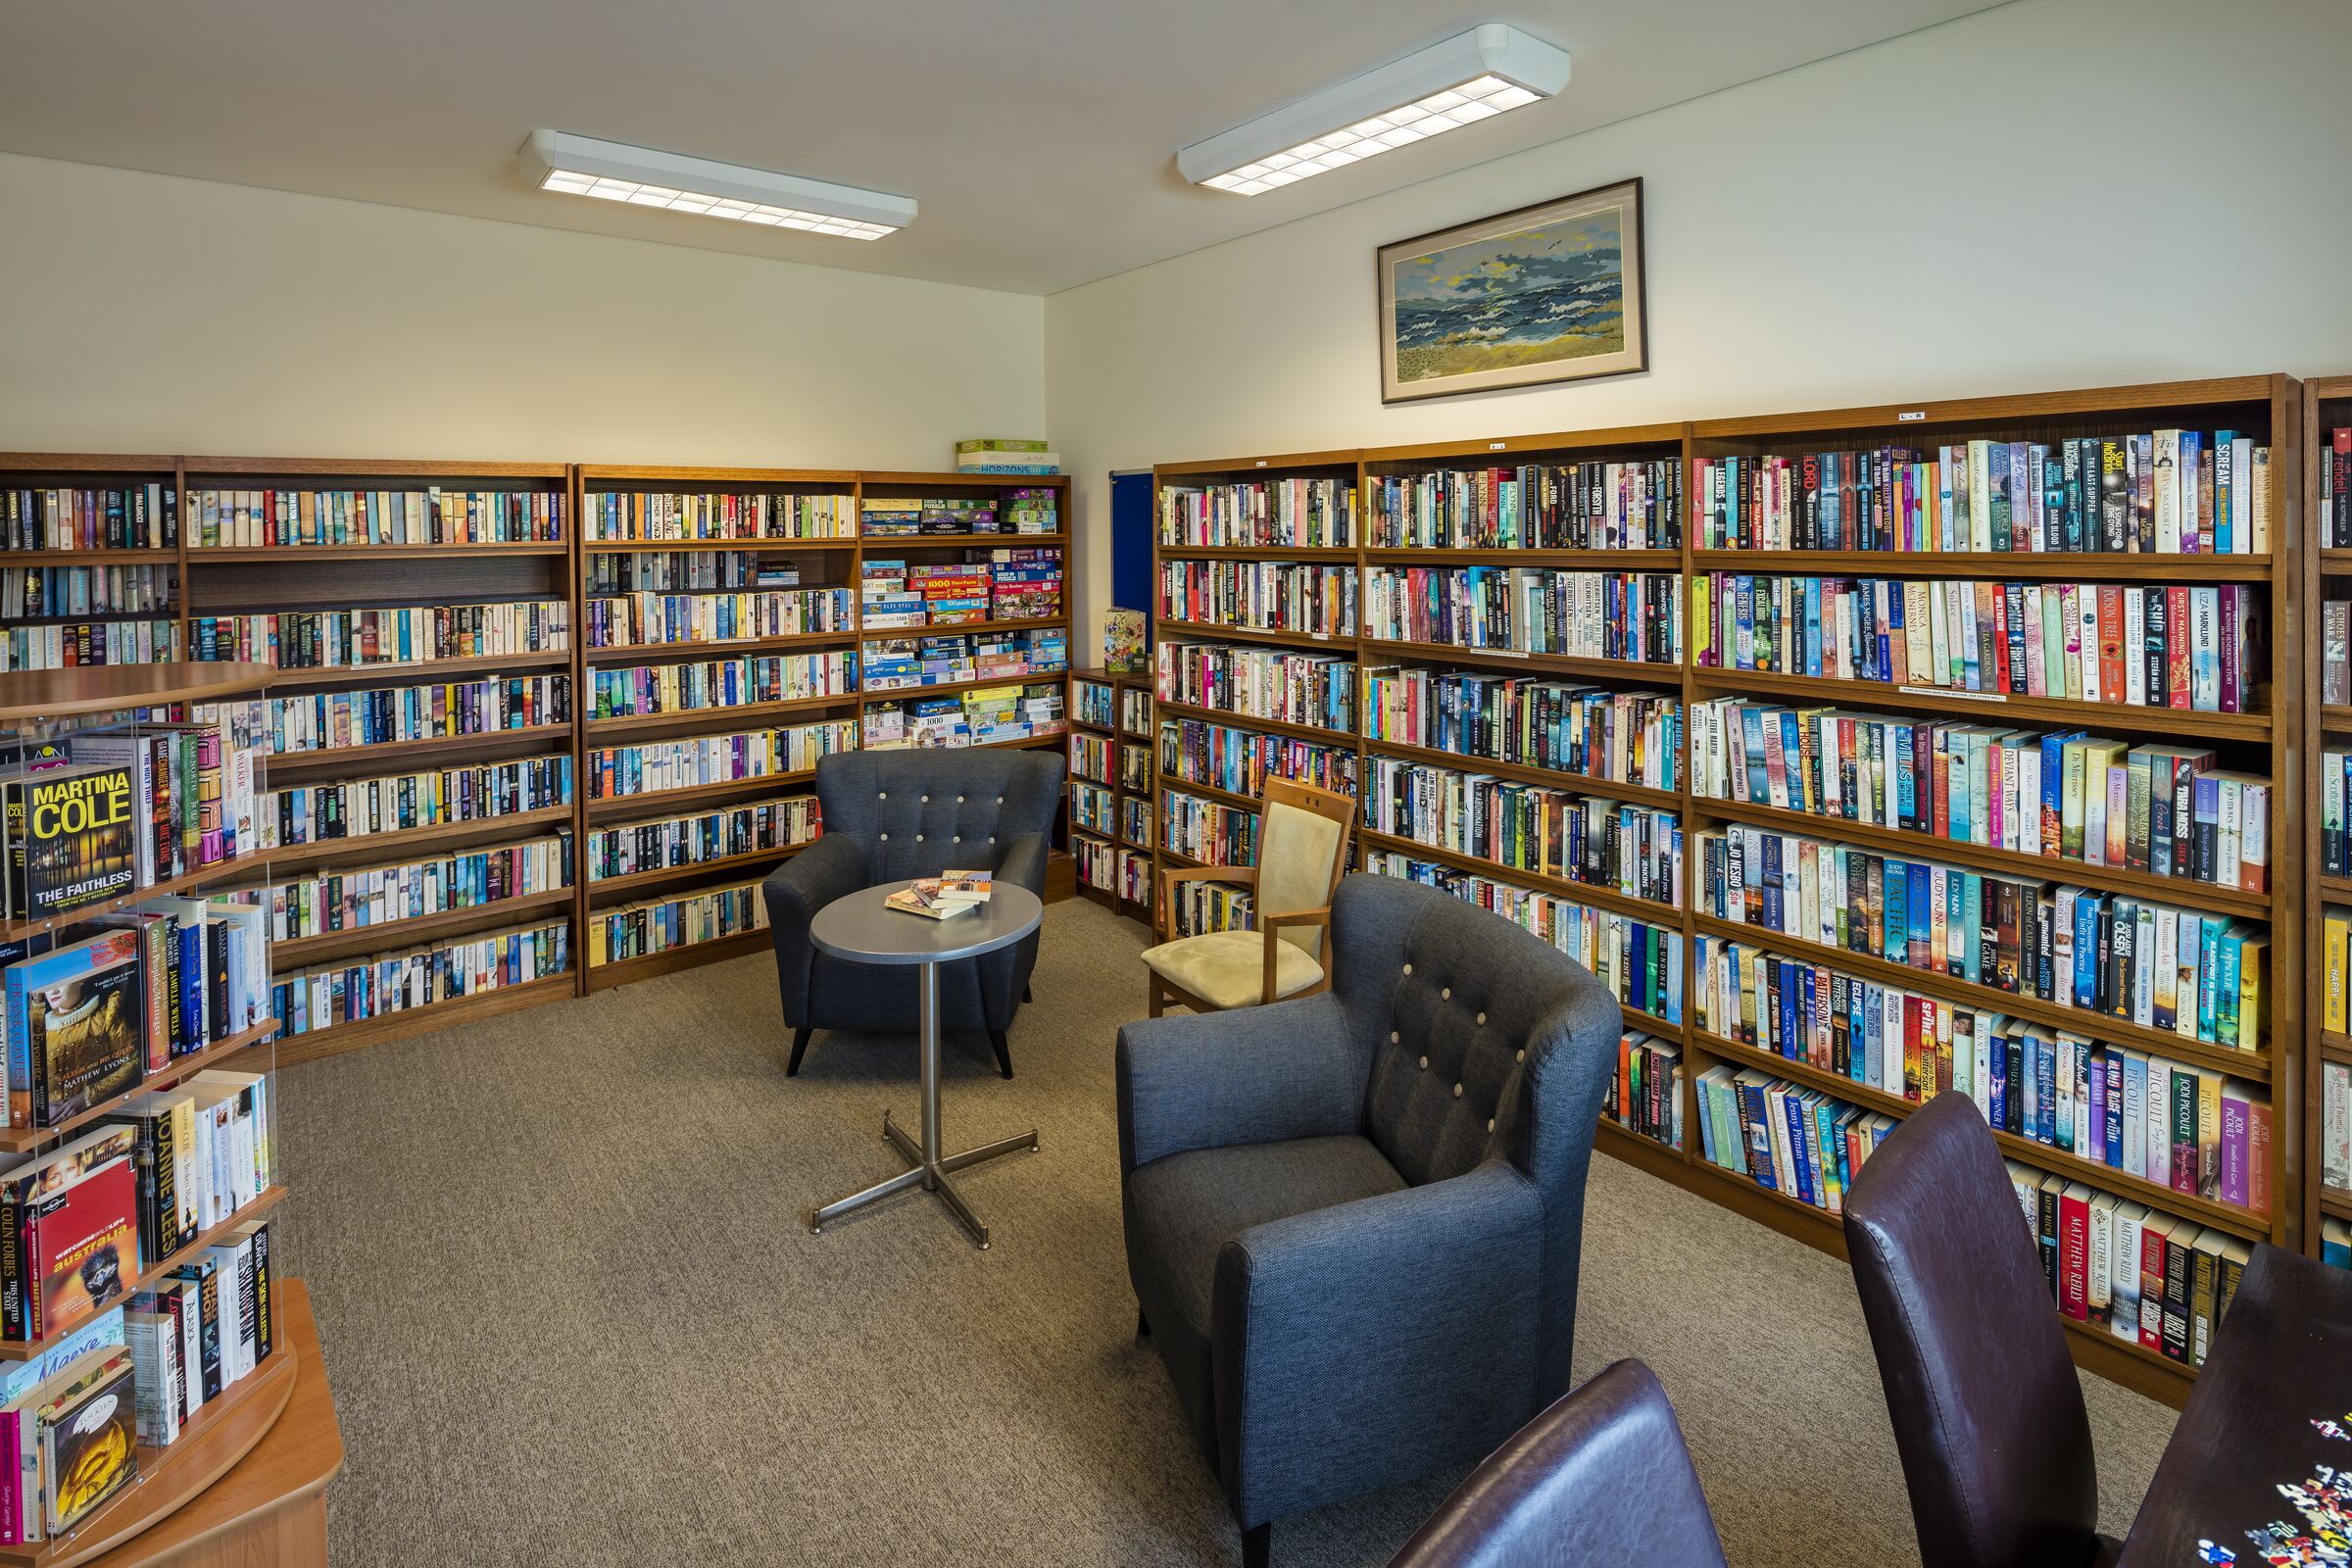 Waterford Park library room with well stocked bookcases and seating